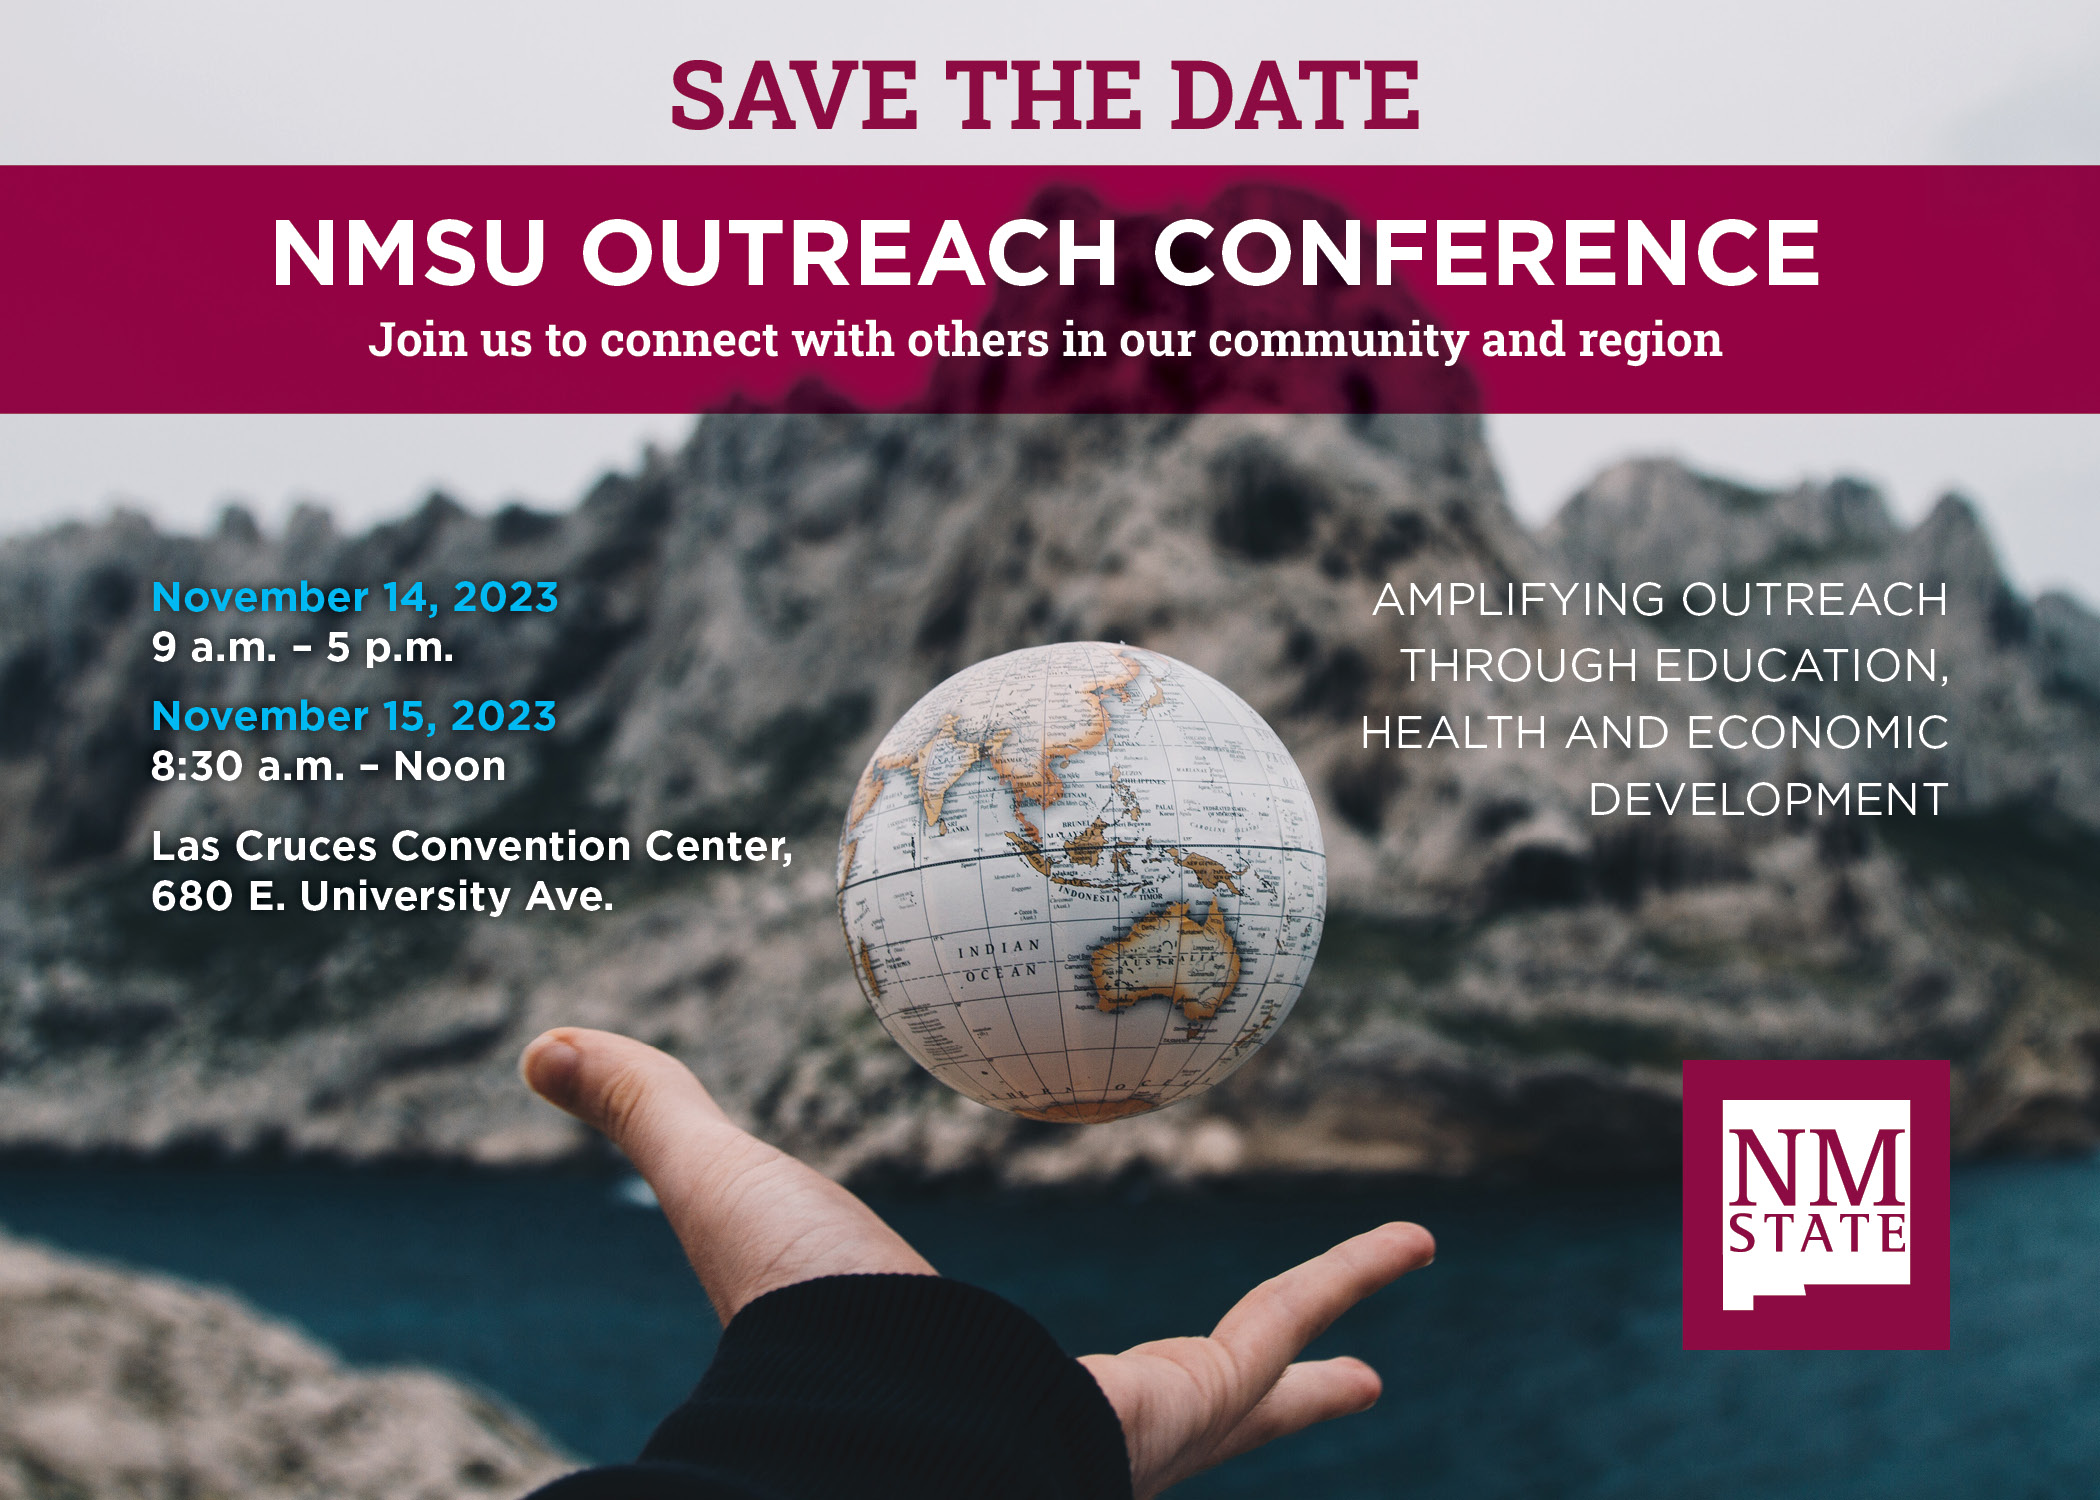 A save the date graphic with conference information